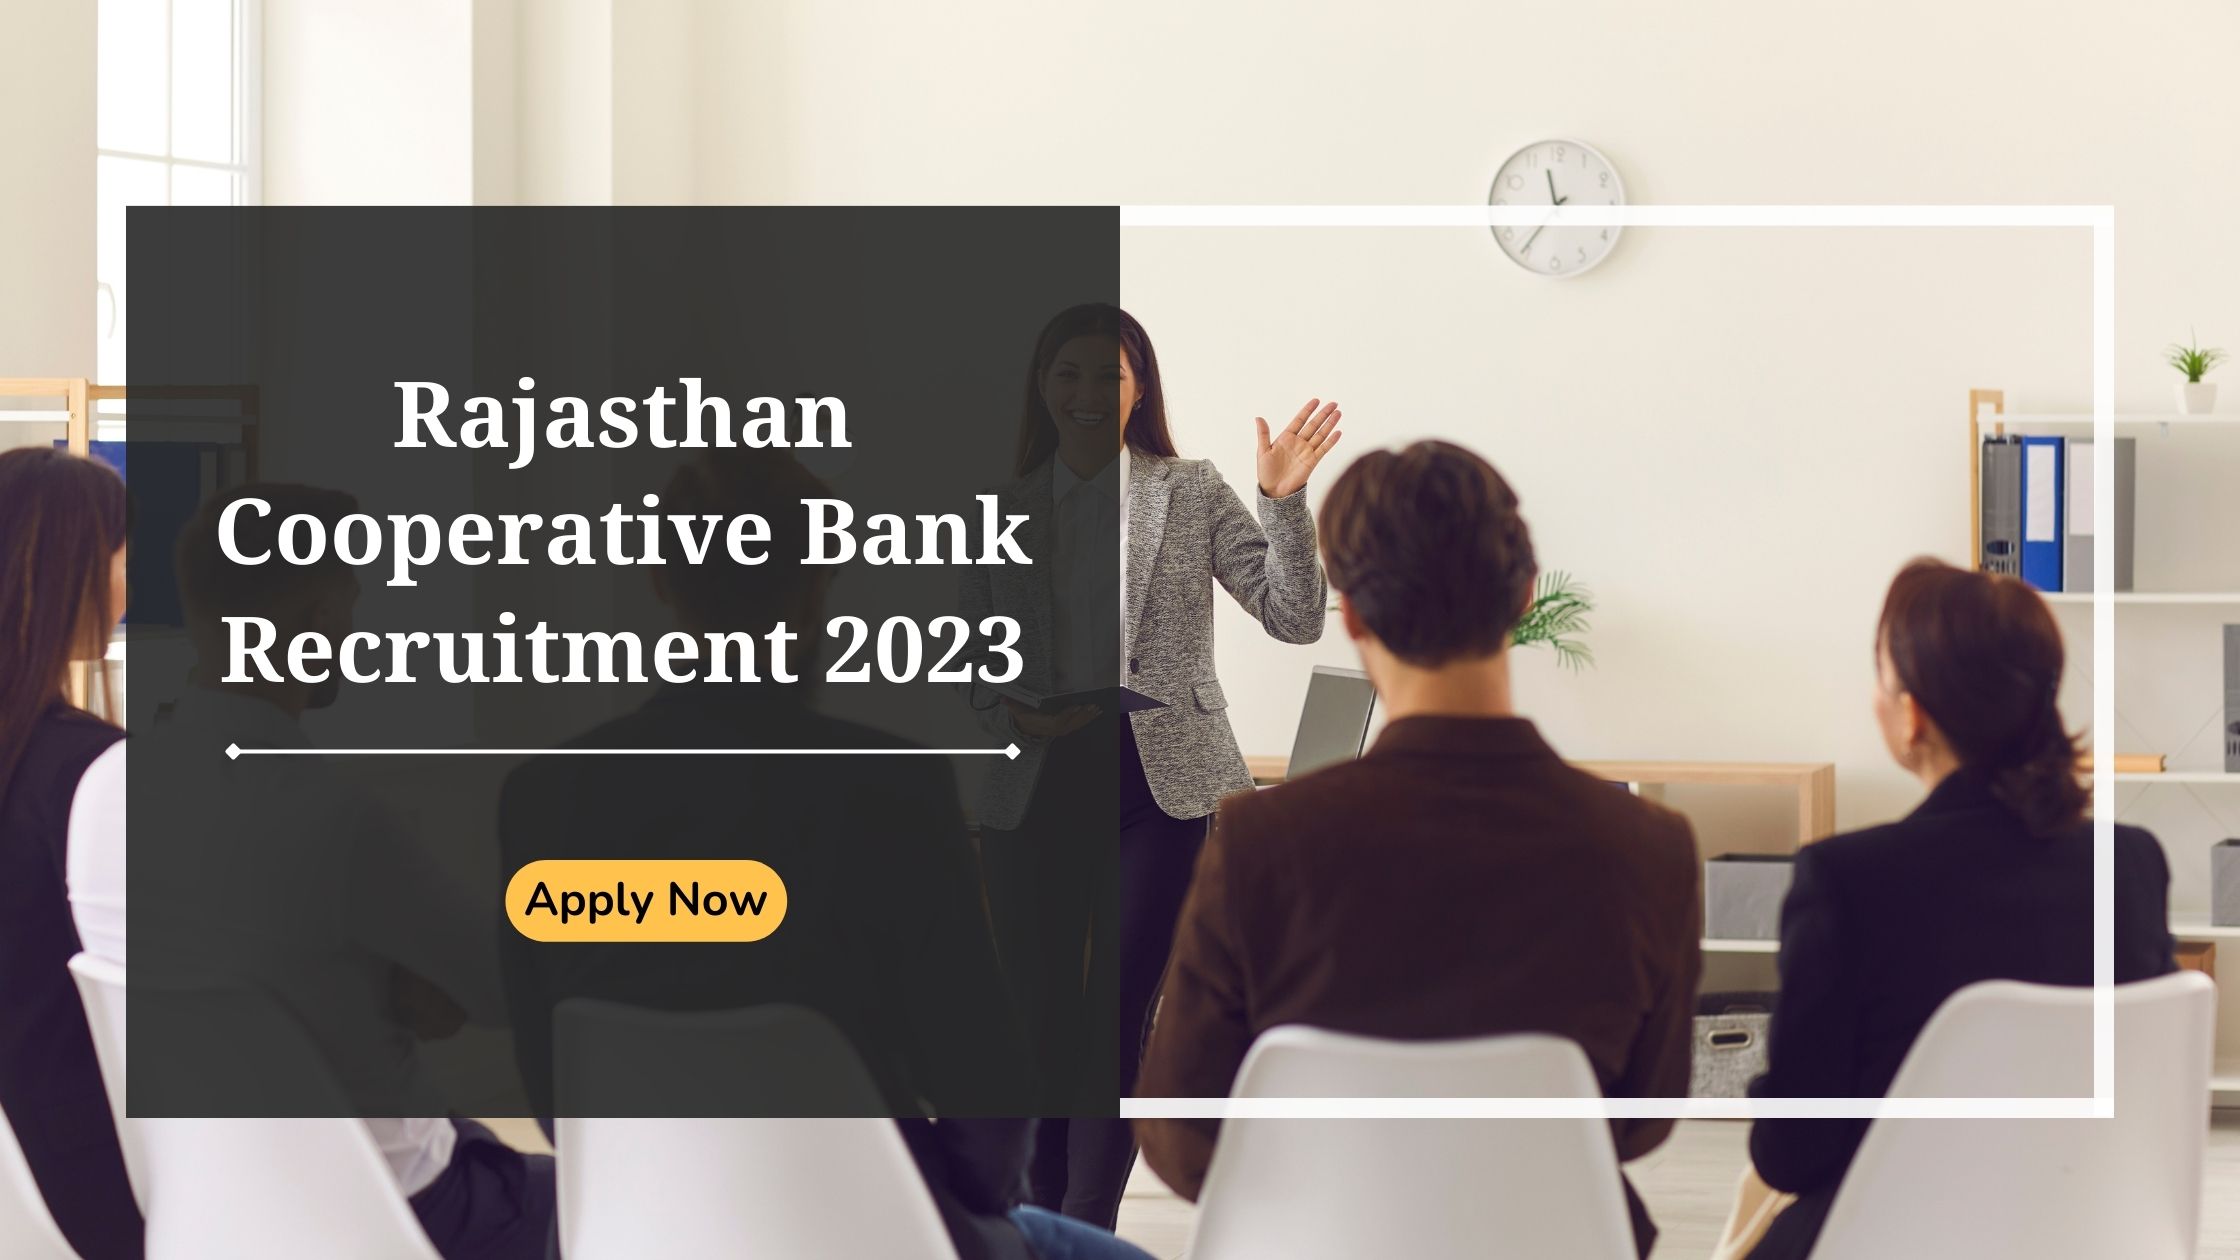 Rajasthan Cooperative Bank Recruitment 2023 Apply Now